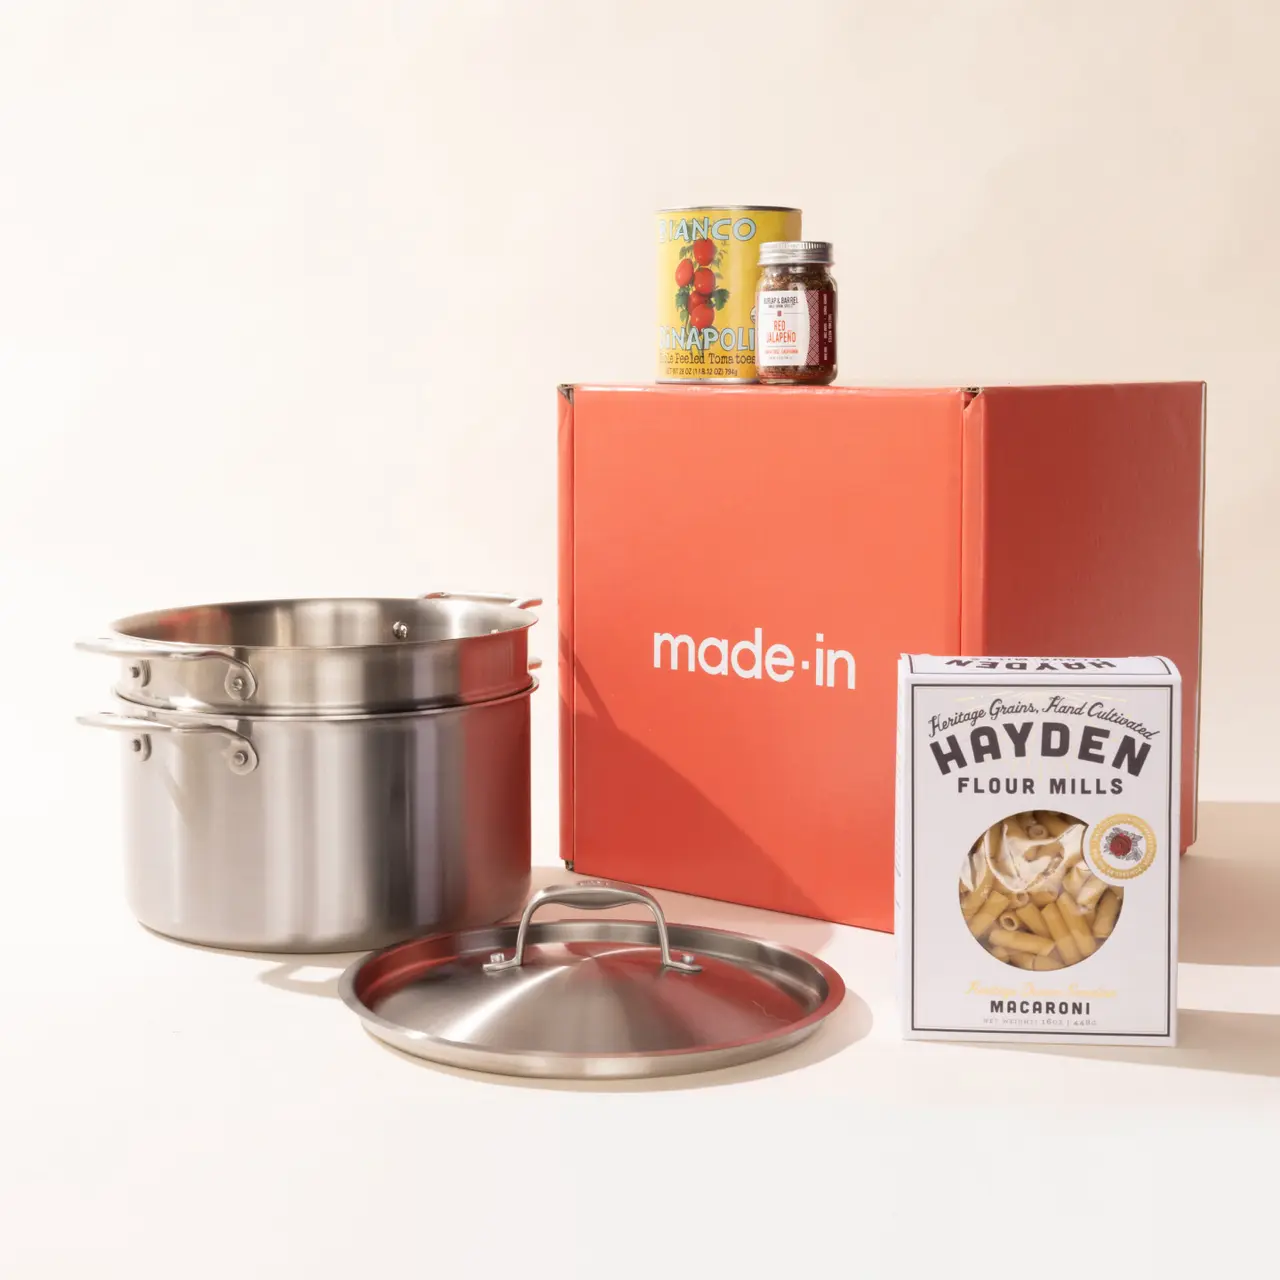 Cookware and food items including a pot, a can of tomatoes, and a box of macaroni beside a 'made-in' branded orange box on a neutral background.